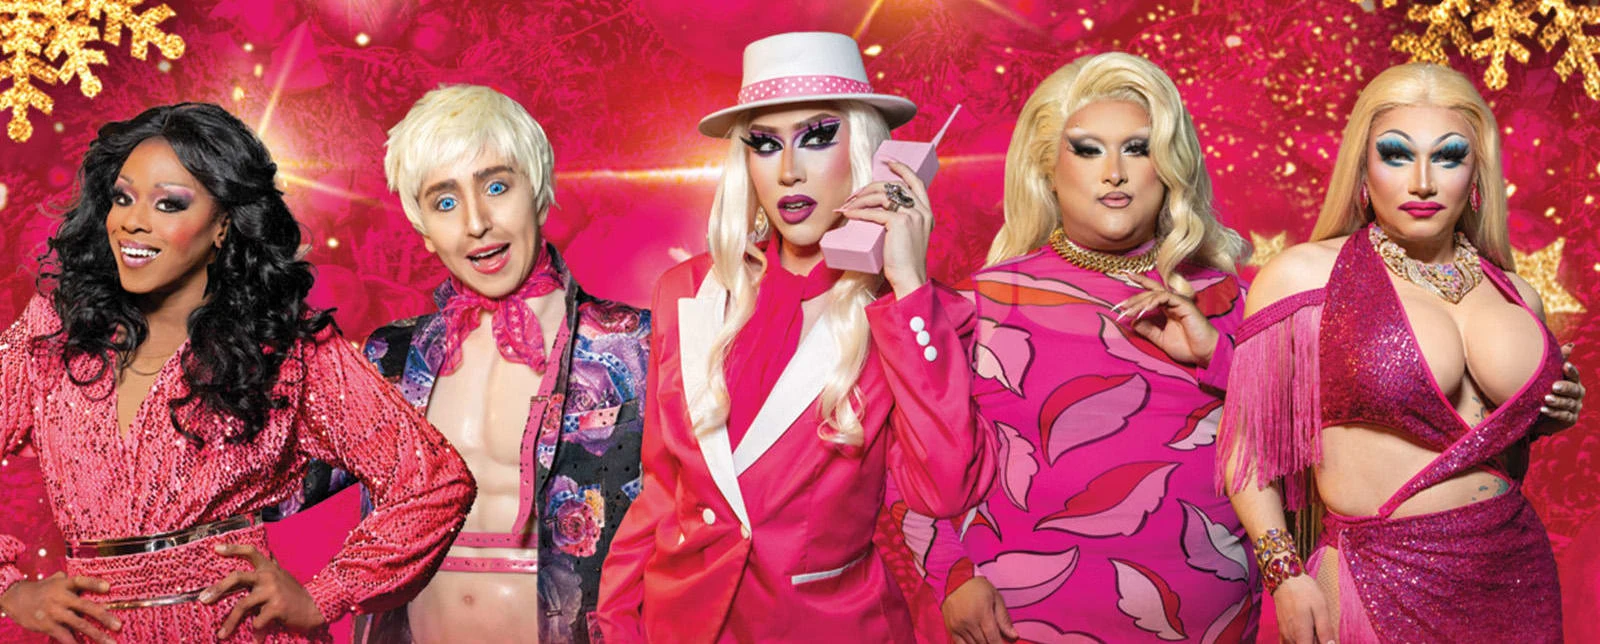 Barbie’s Winter Wonderland: A Christmas Drag Spectacular: What to expect - 1